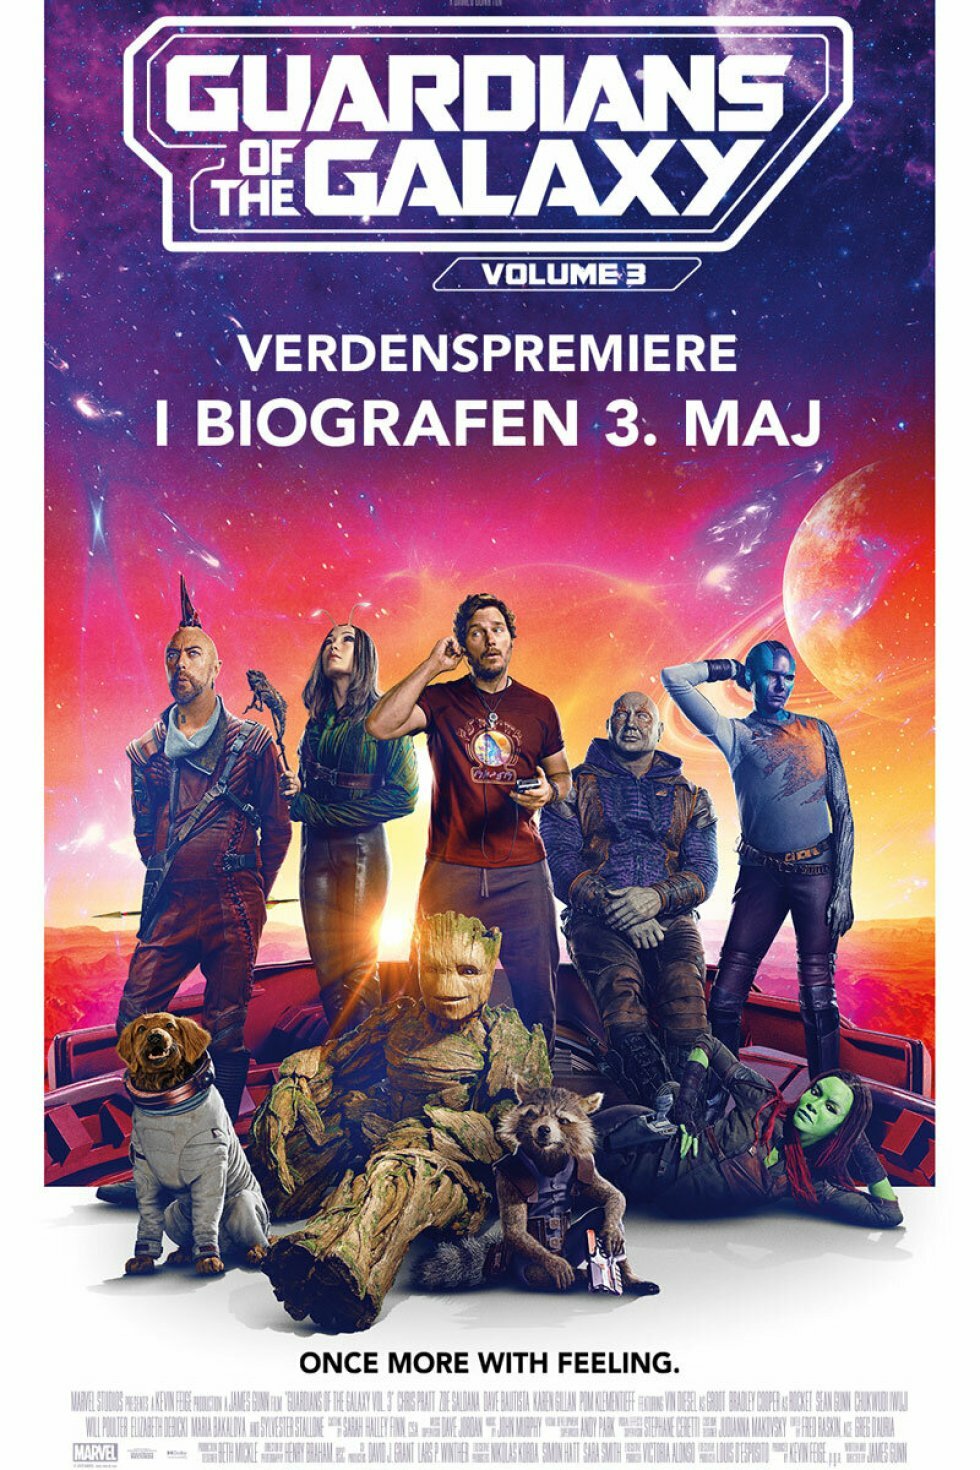 Anmeldelse: Guardians of the Galaxy Vol. 3